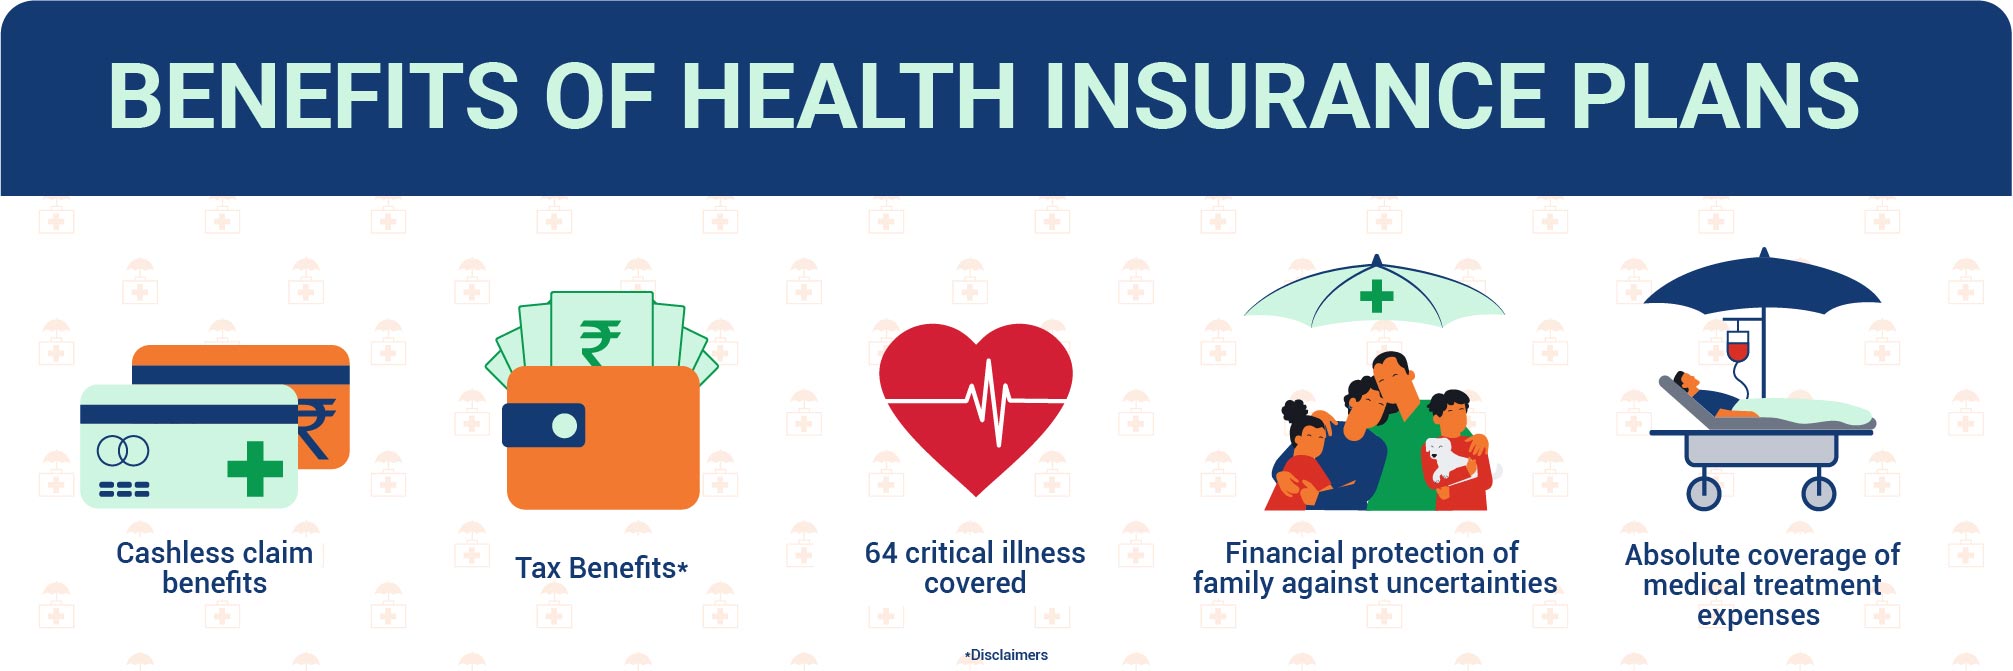 benefits-of-health-insurance-plans